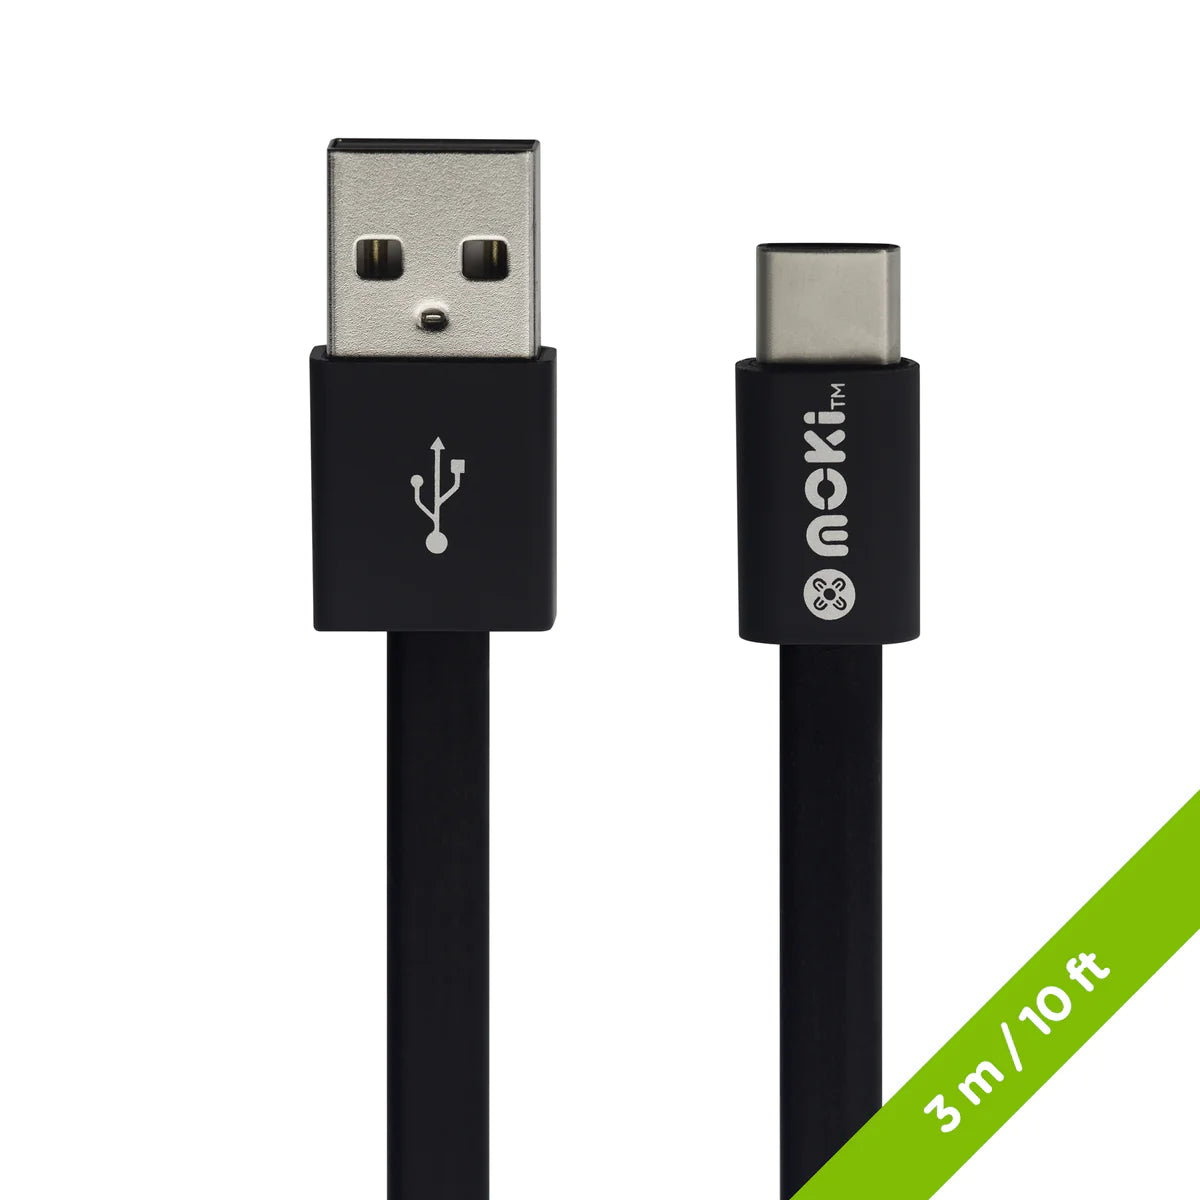 Moki Type-C to USB SynCharge Cable 3m